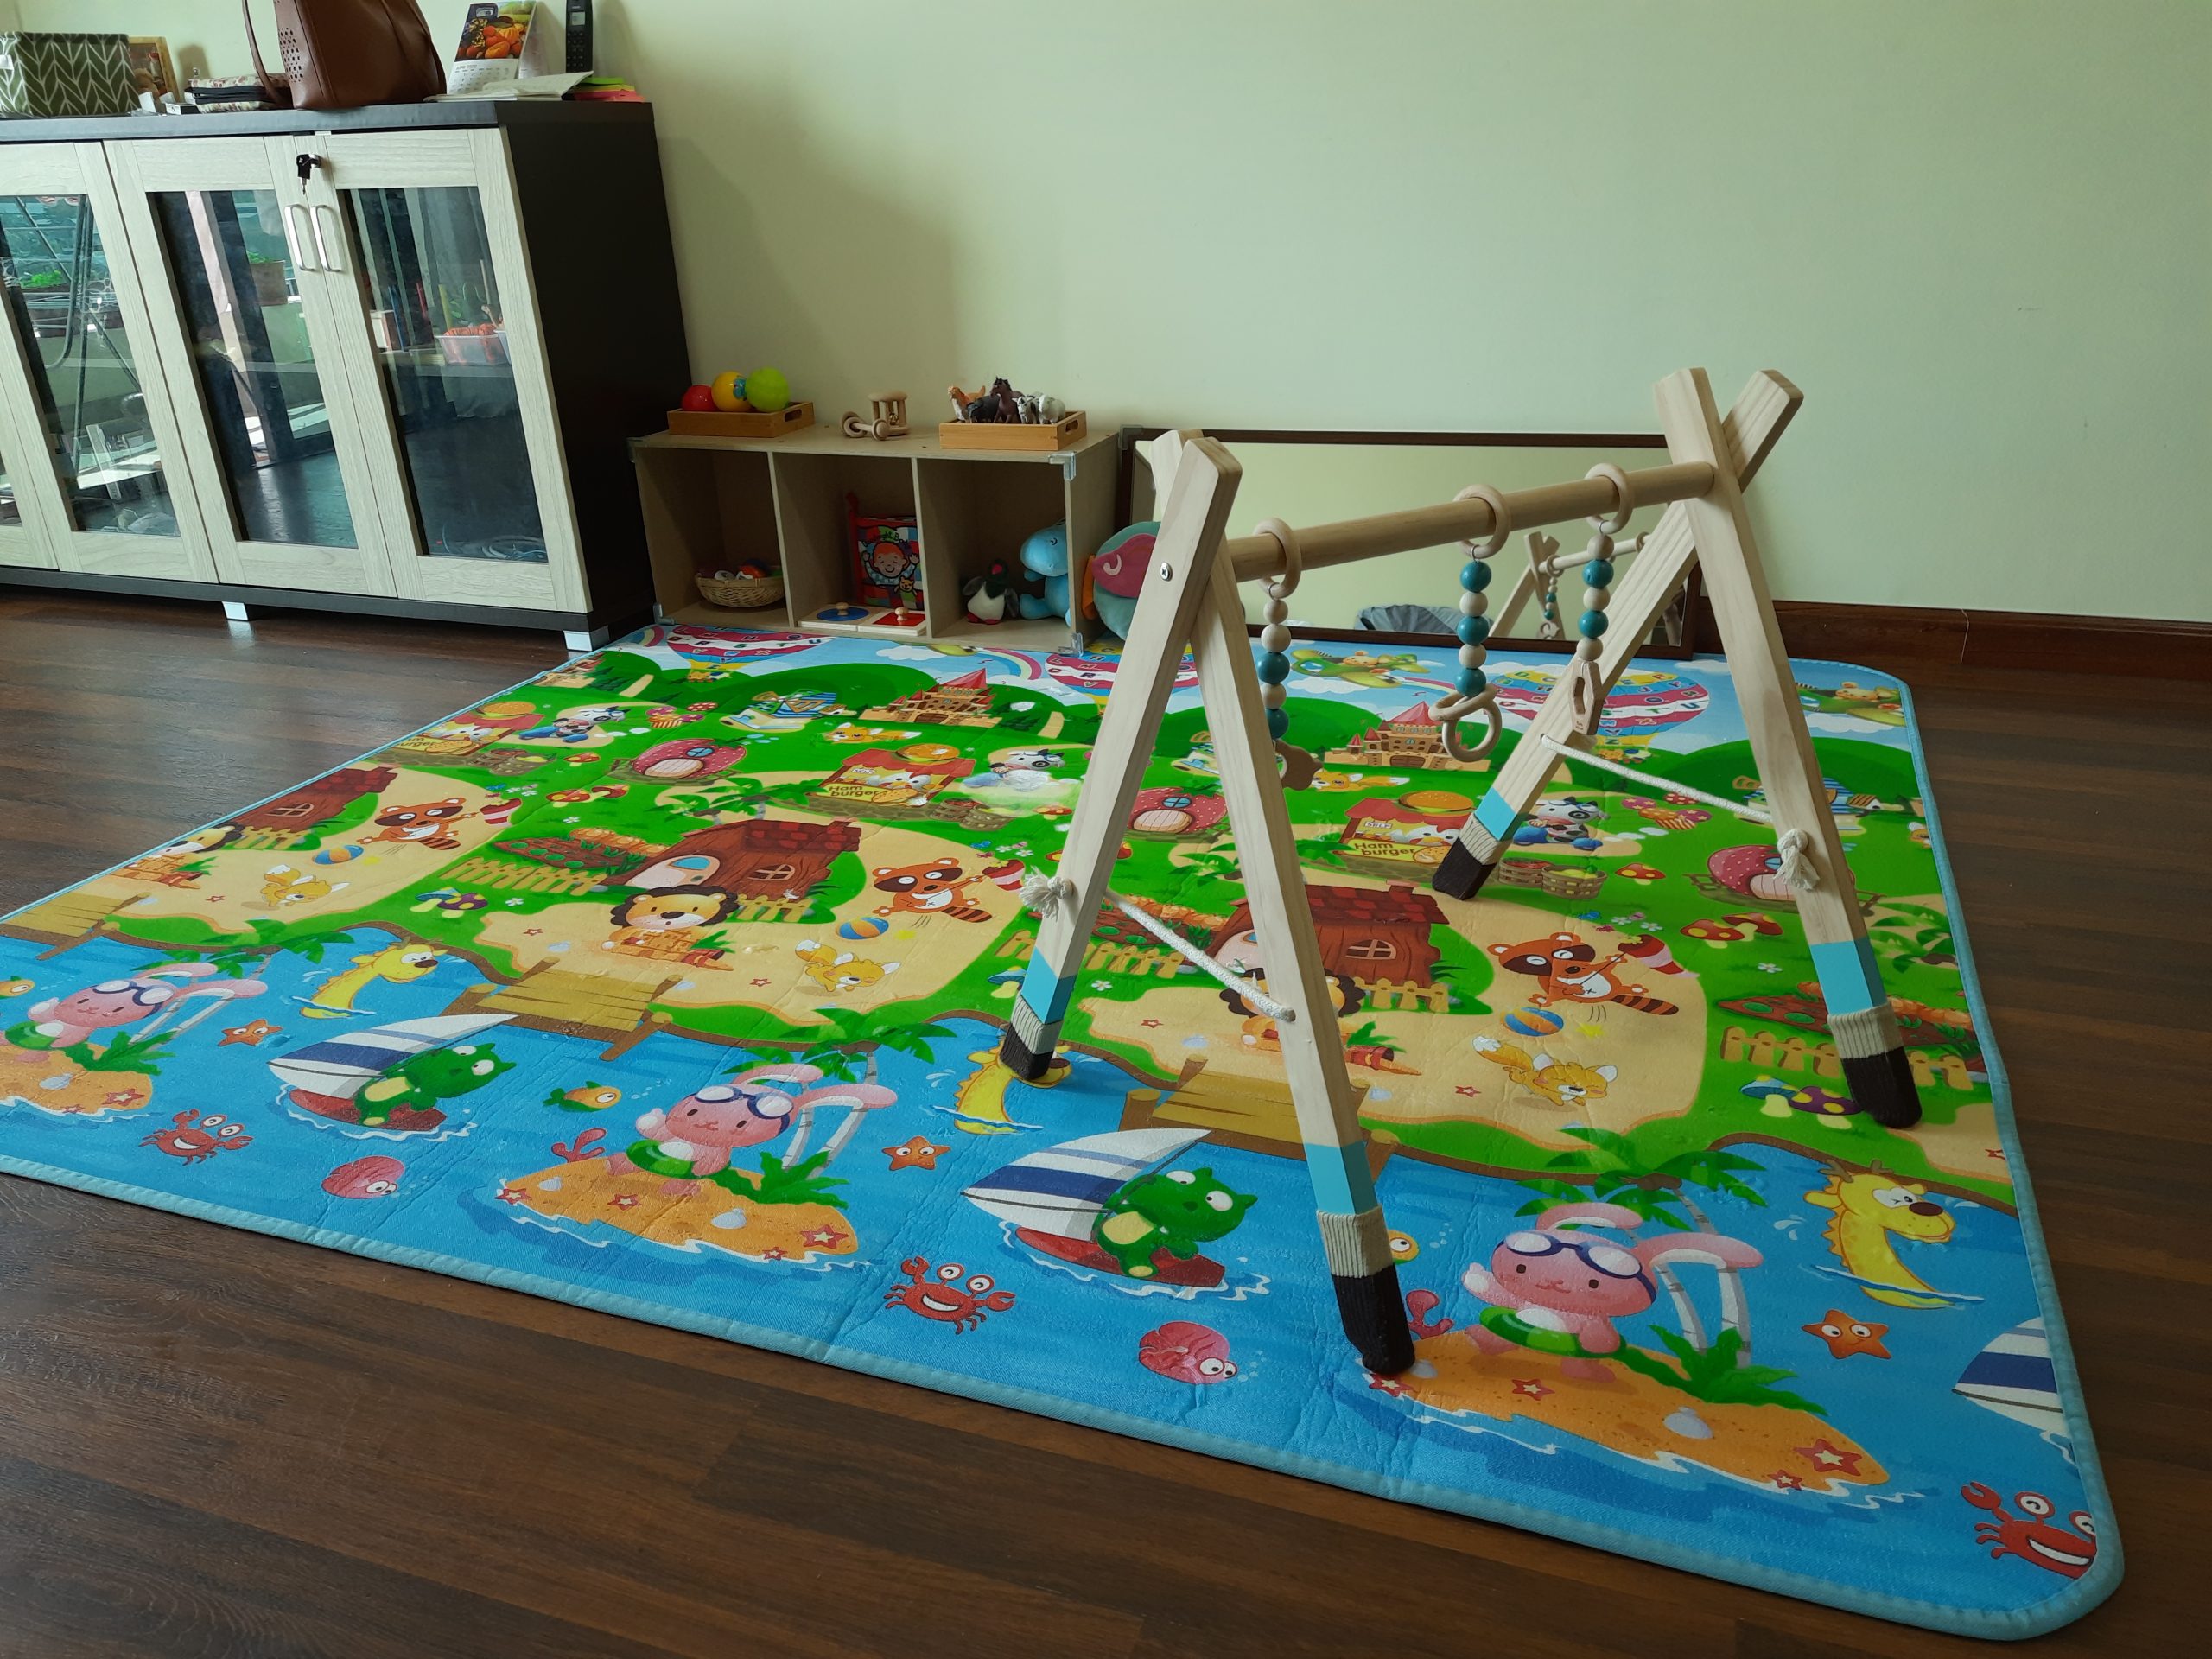 Our baby's play area